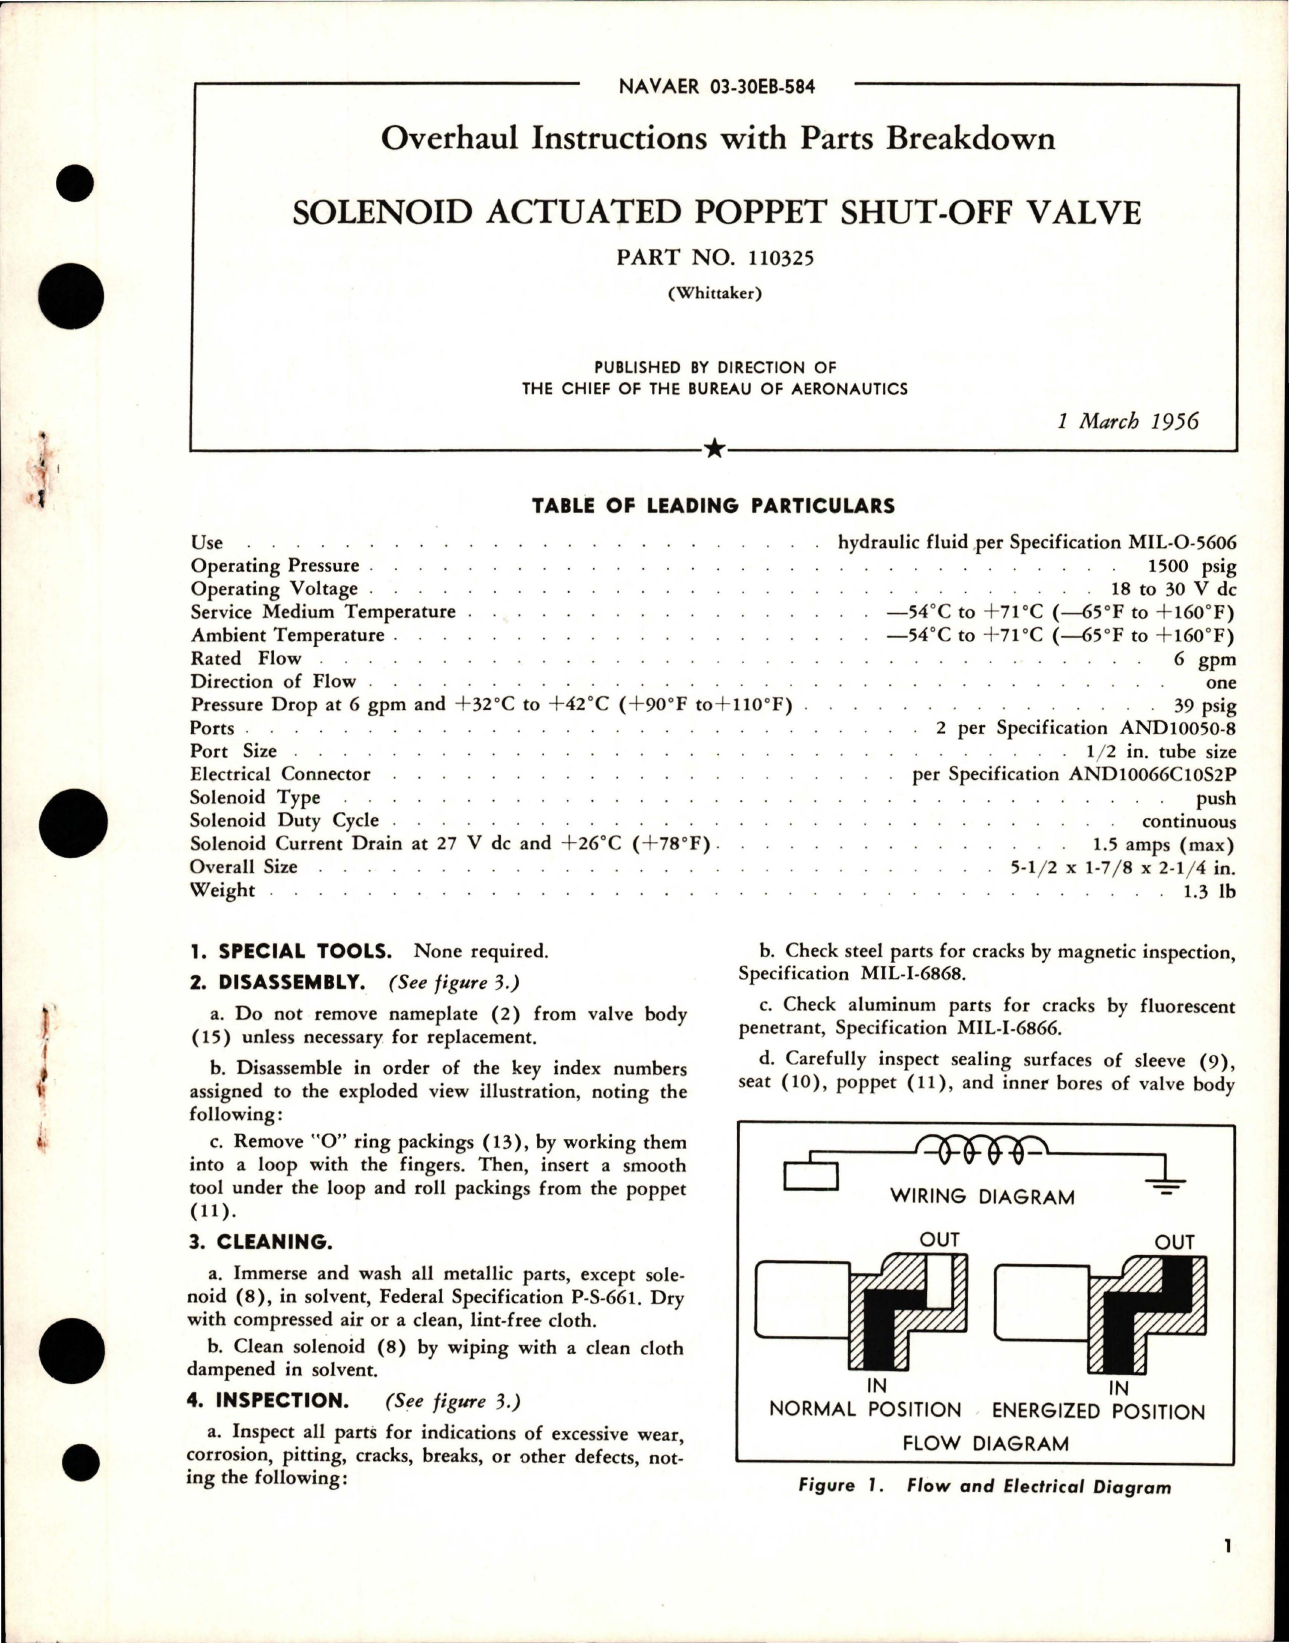 Sample page 1 from AirCorps Library document: Overhaul Instructions with Parts Breakdown for Solenoid Actuated Poppet Shut Off Valve - Part 110325